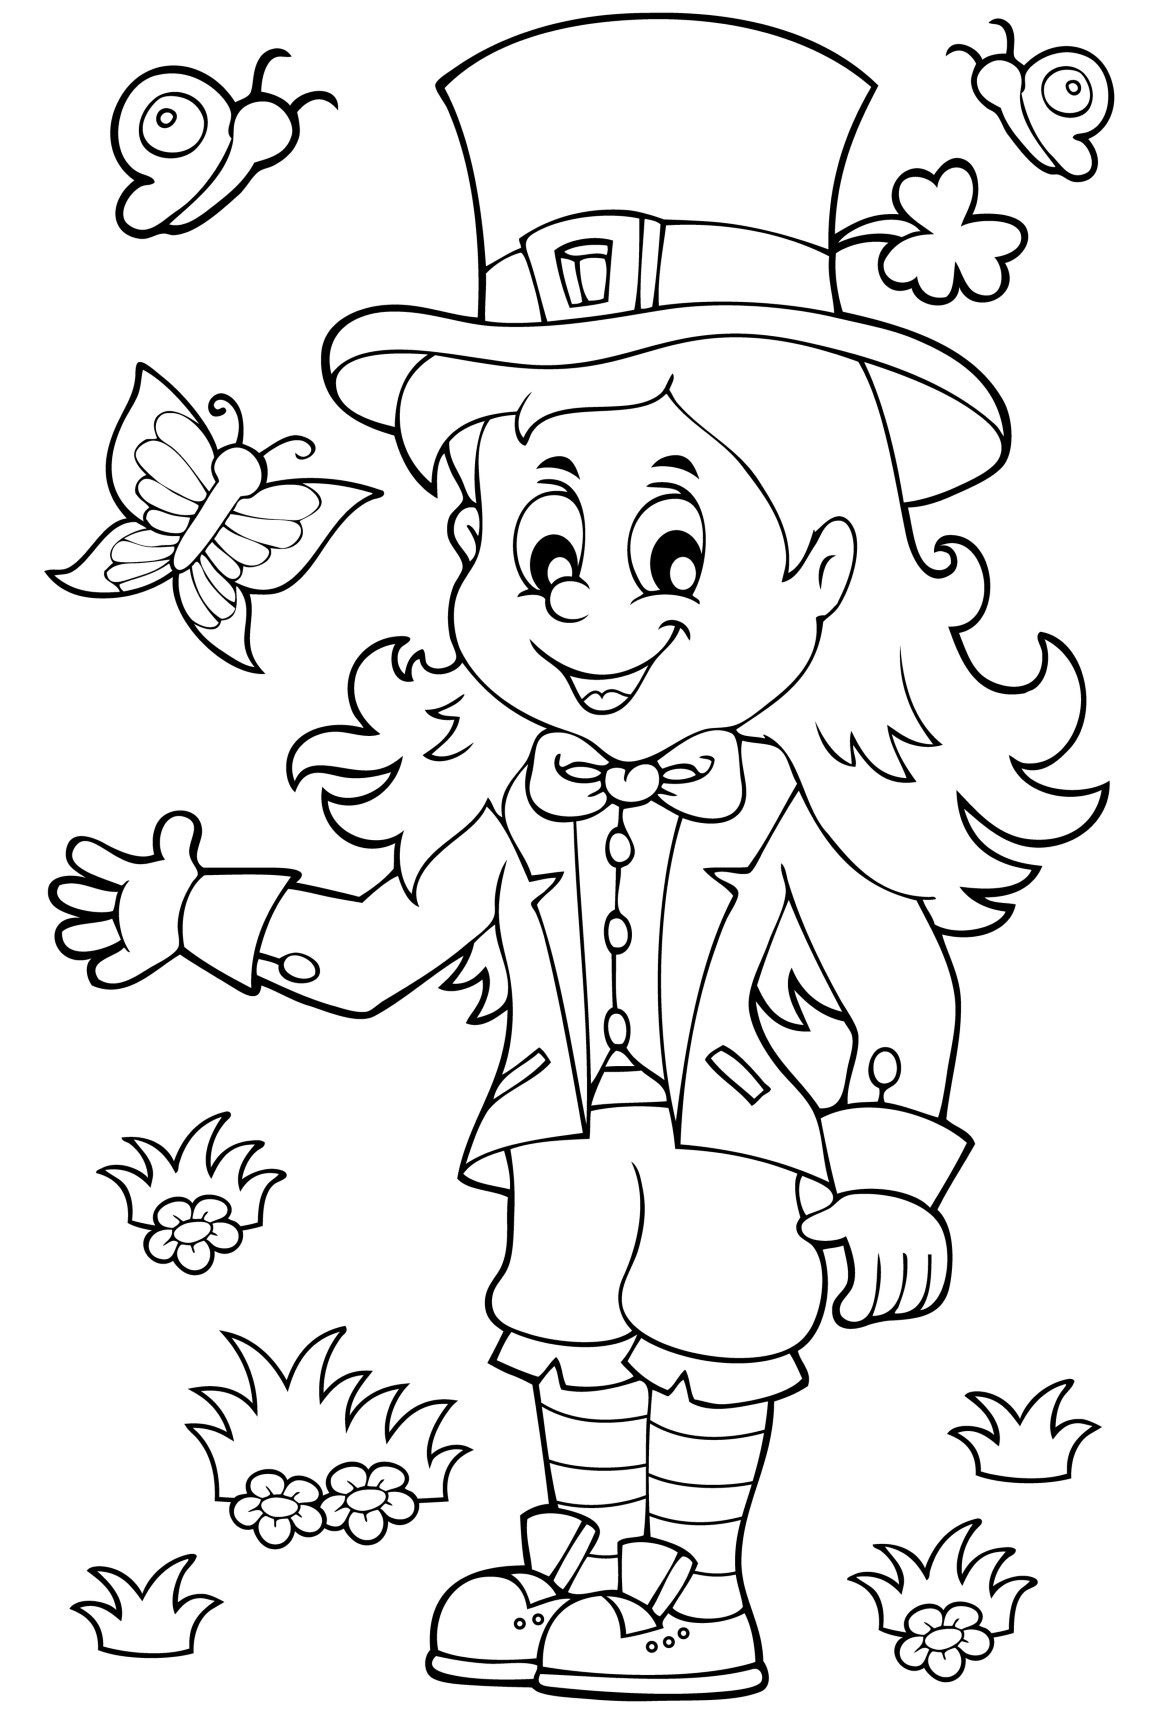 St. Patrick's Day Coloring Pages - Pretty Providence